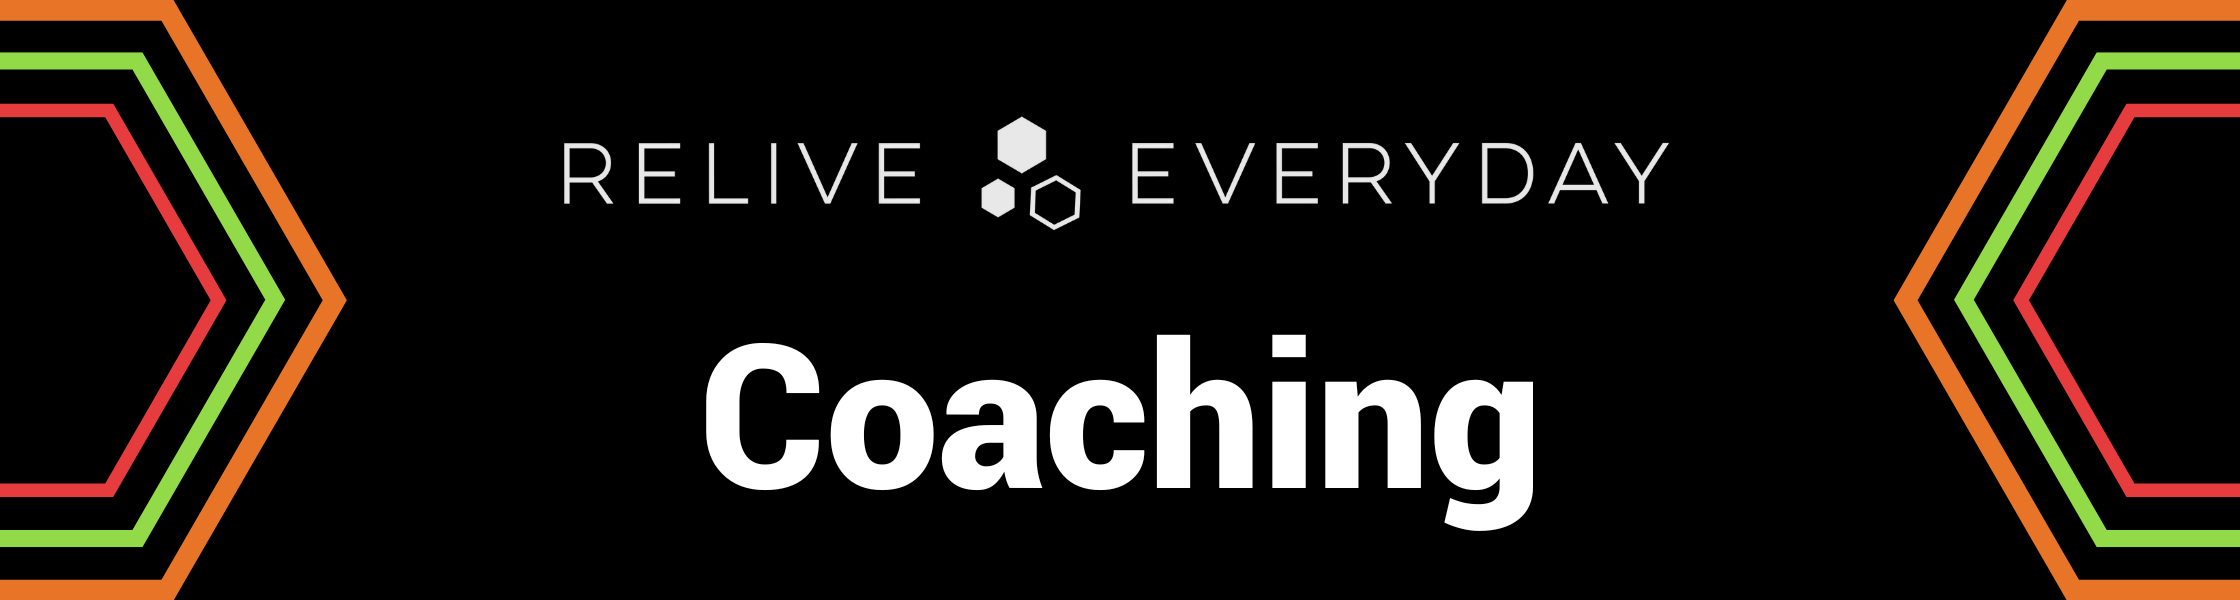 Relive Everyday Coaching Web Page Header